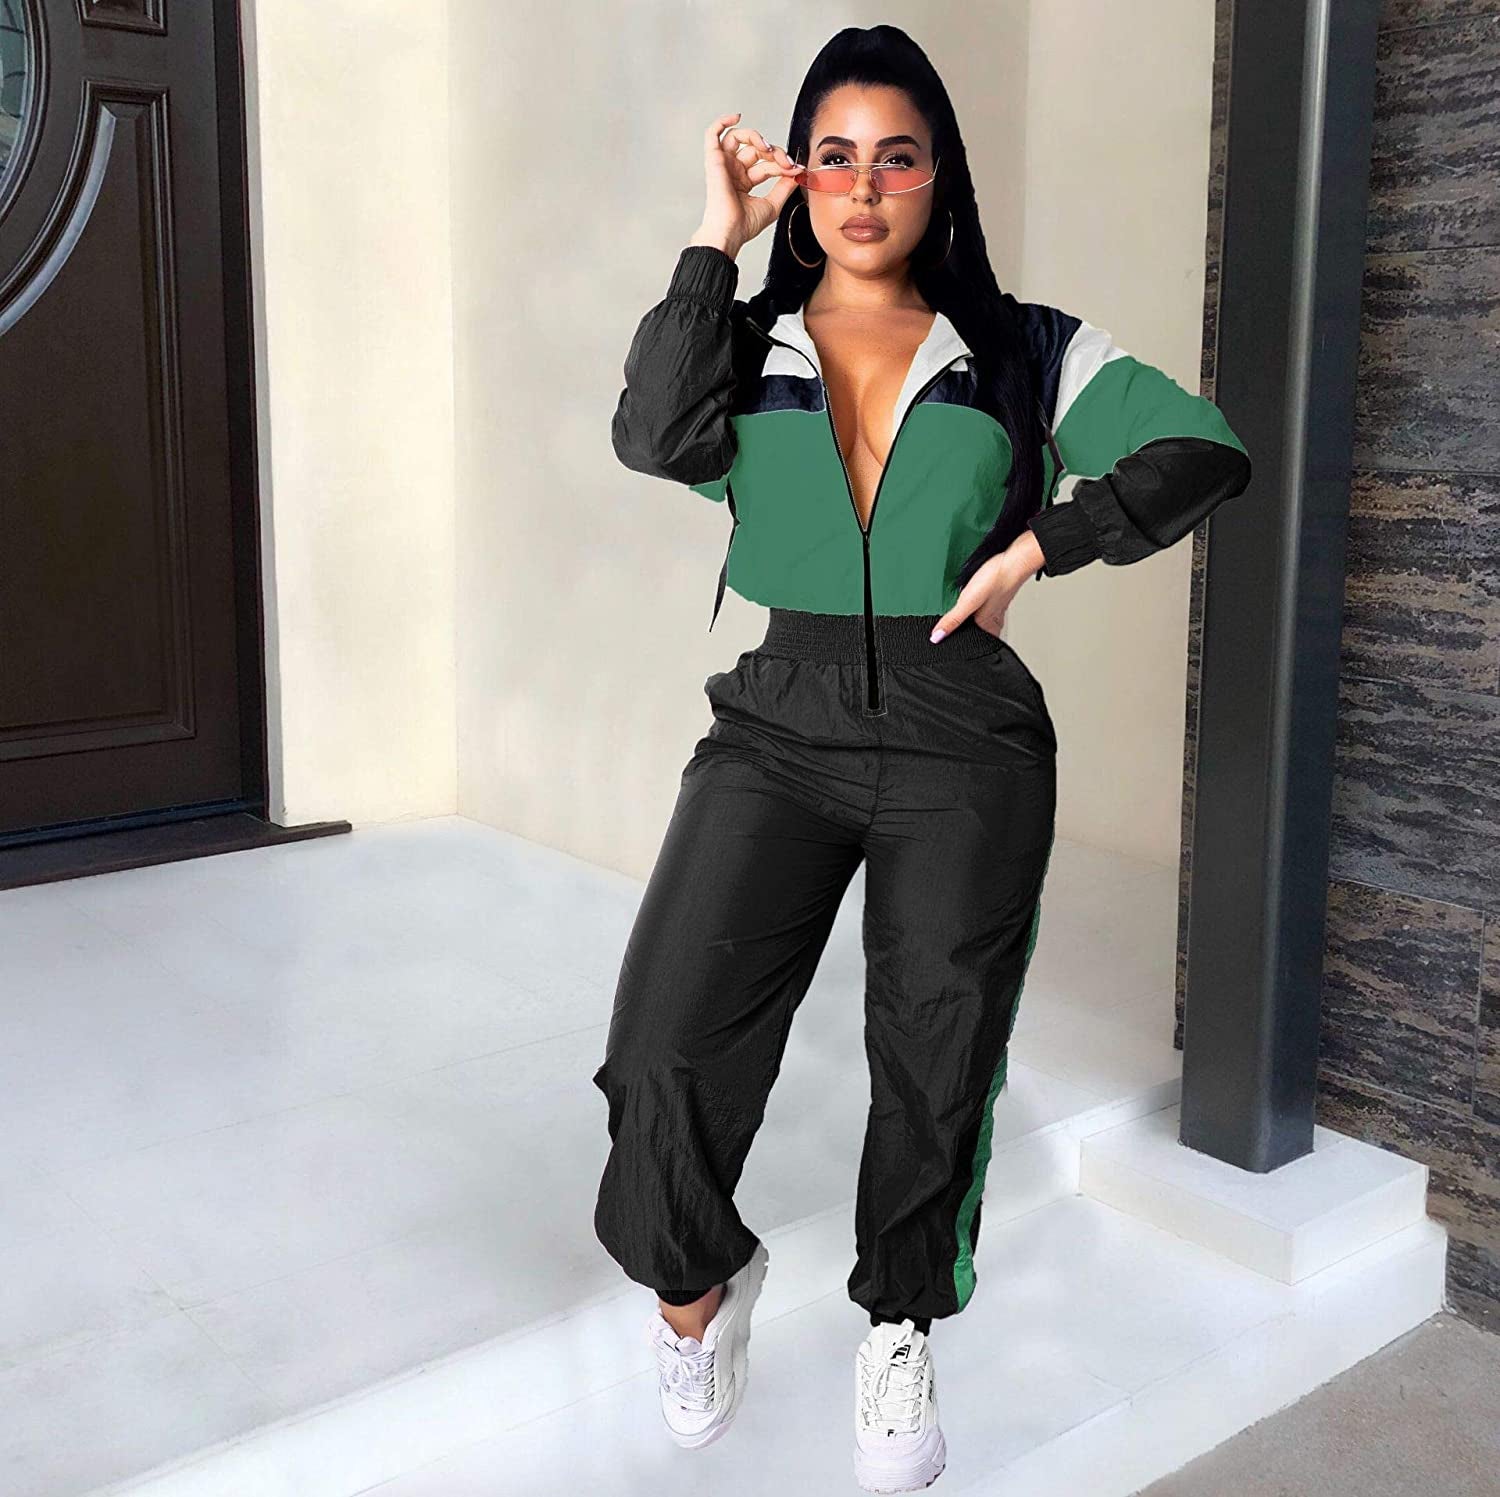 "Elegant Colorblock One Piece Outfit - Enhance your Style with this High Waist Pants Long Sleeve Jumpsuit"